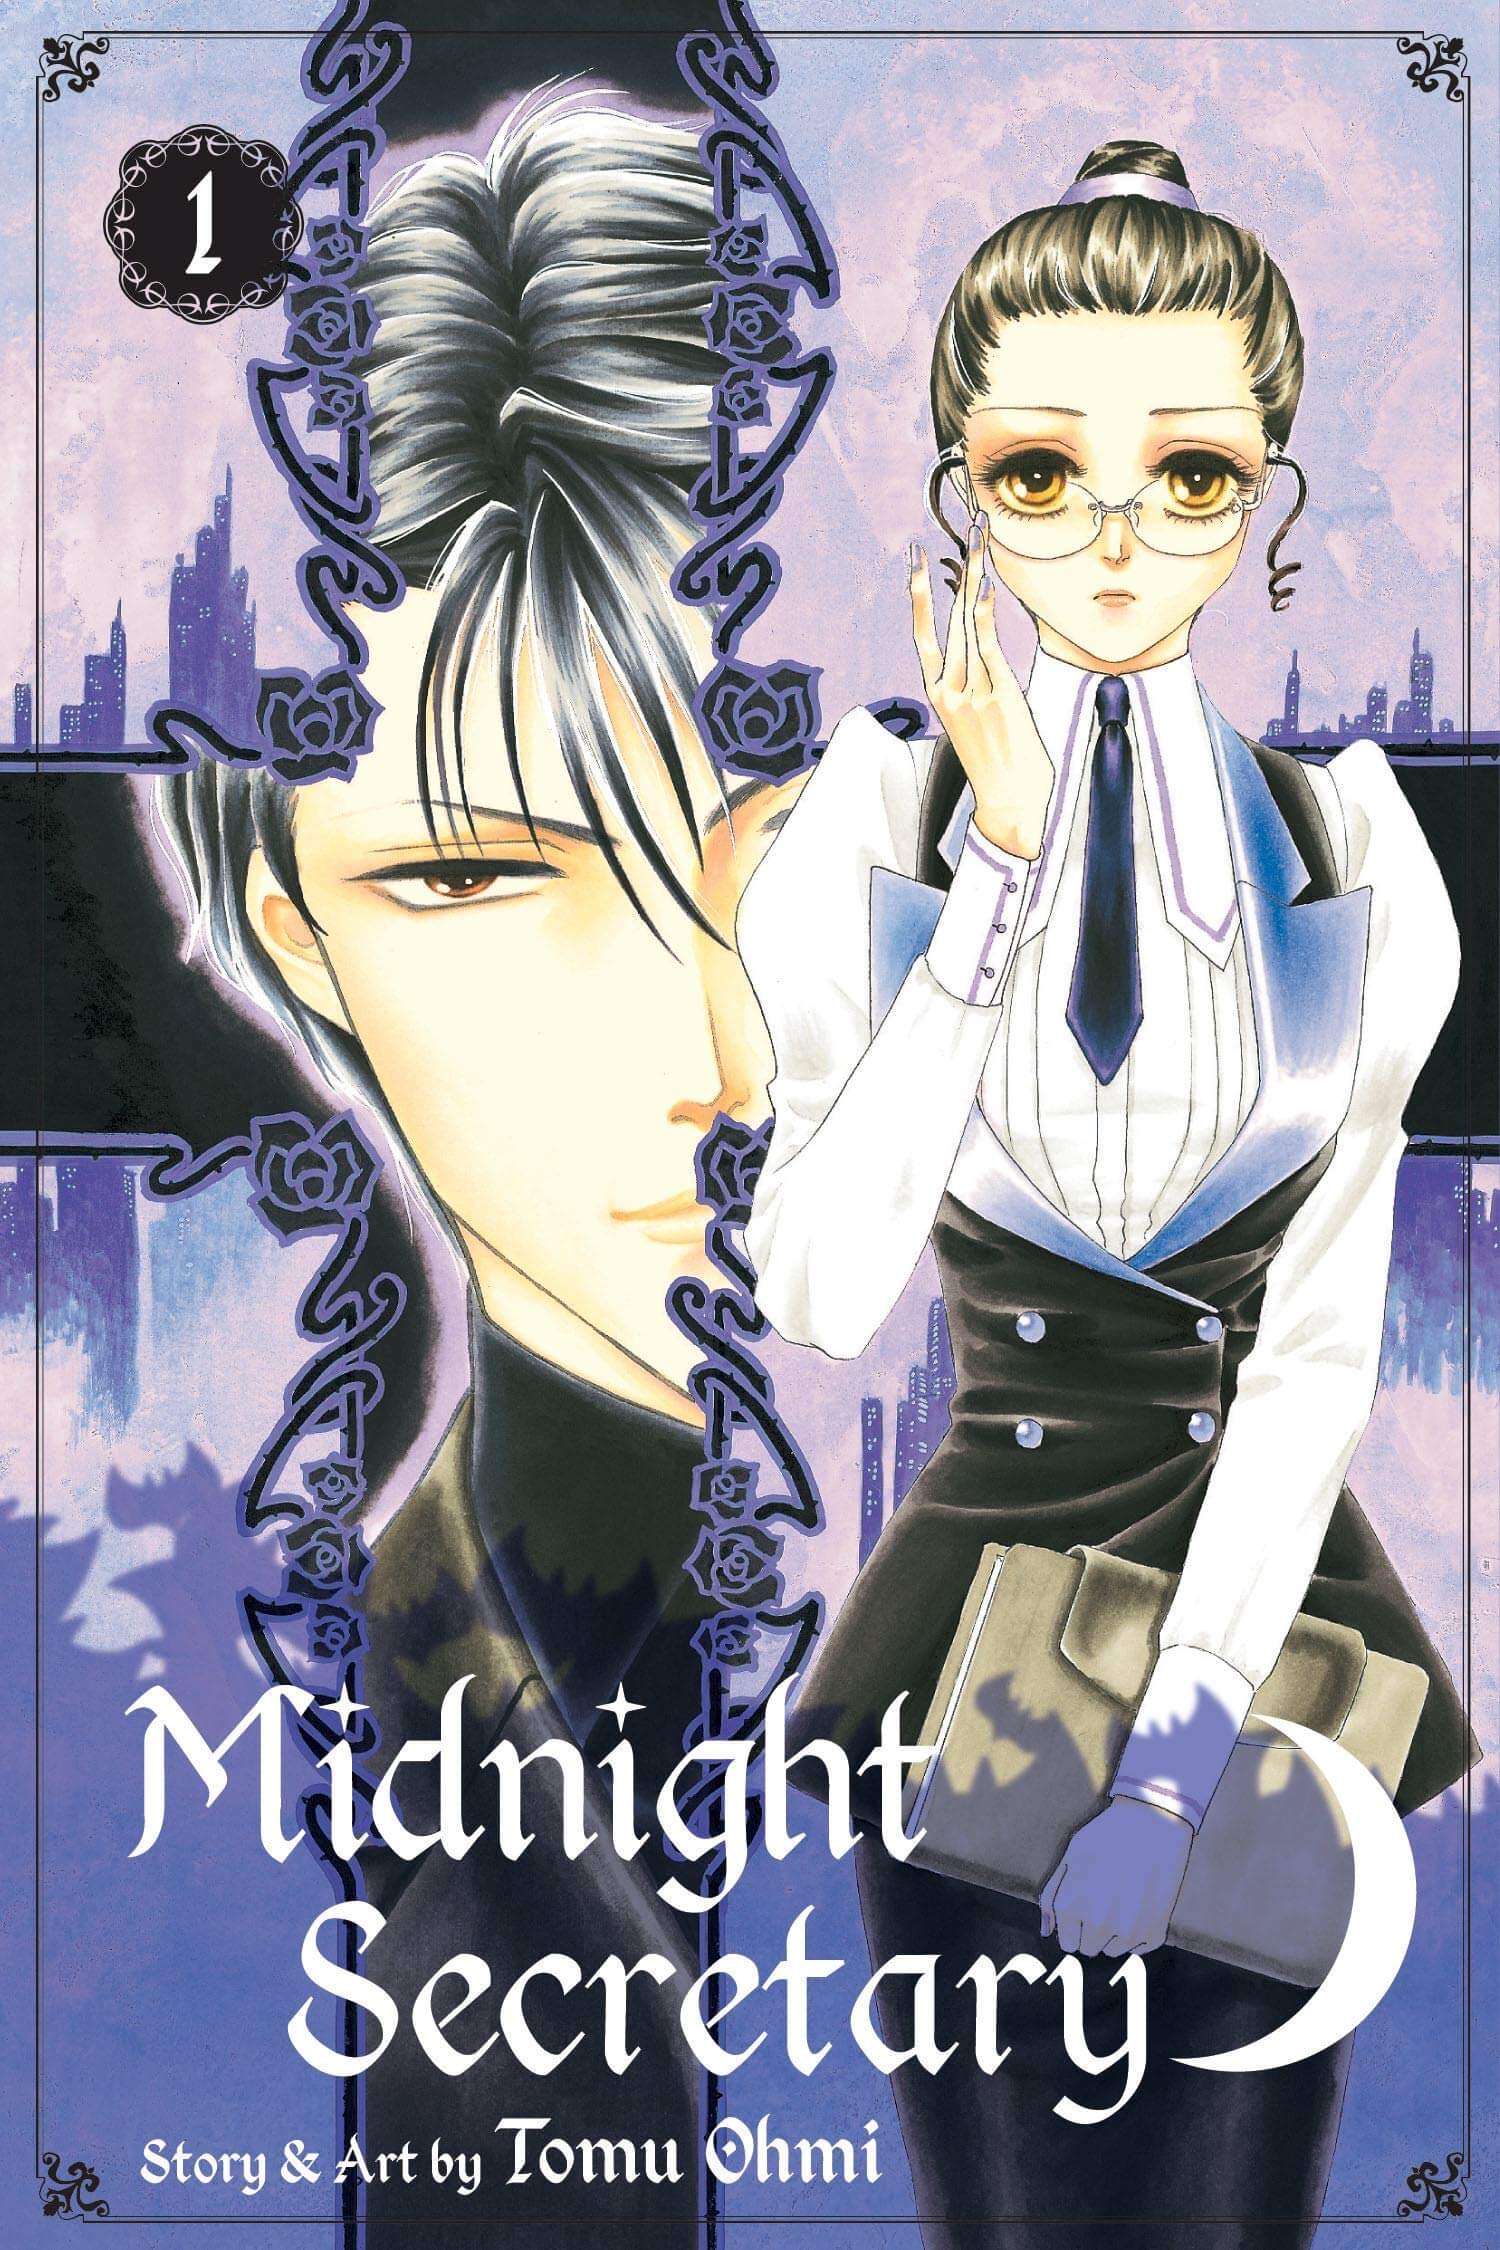 Cover of the first volume of the Midnight Secretary manga.